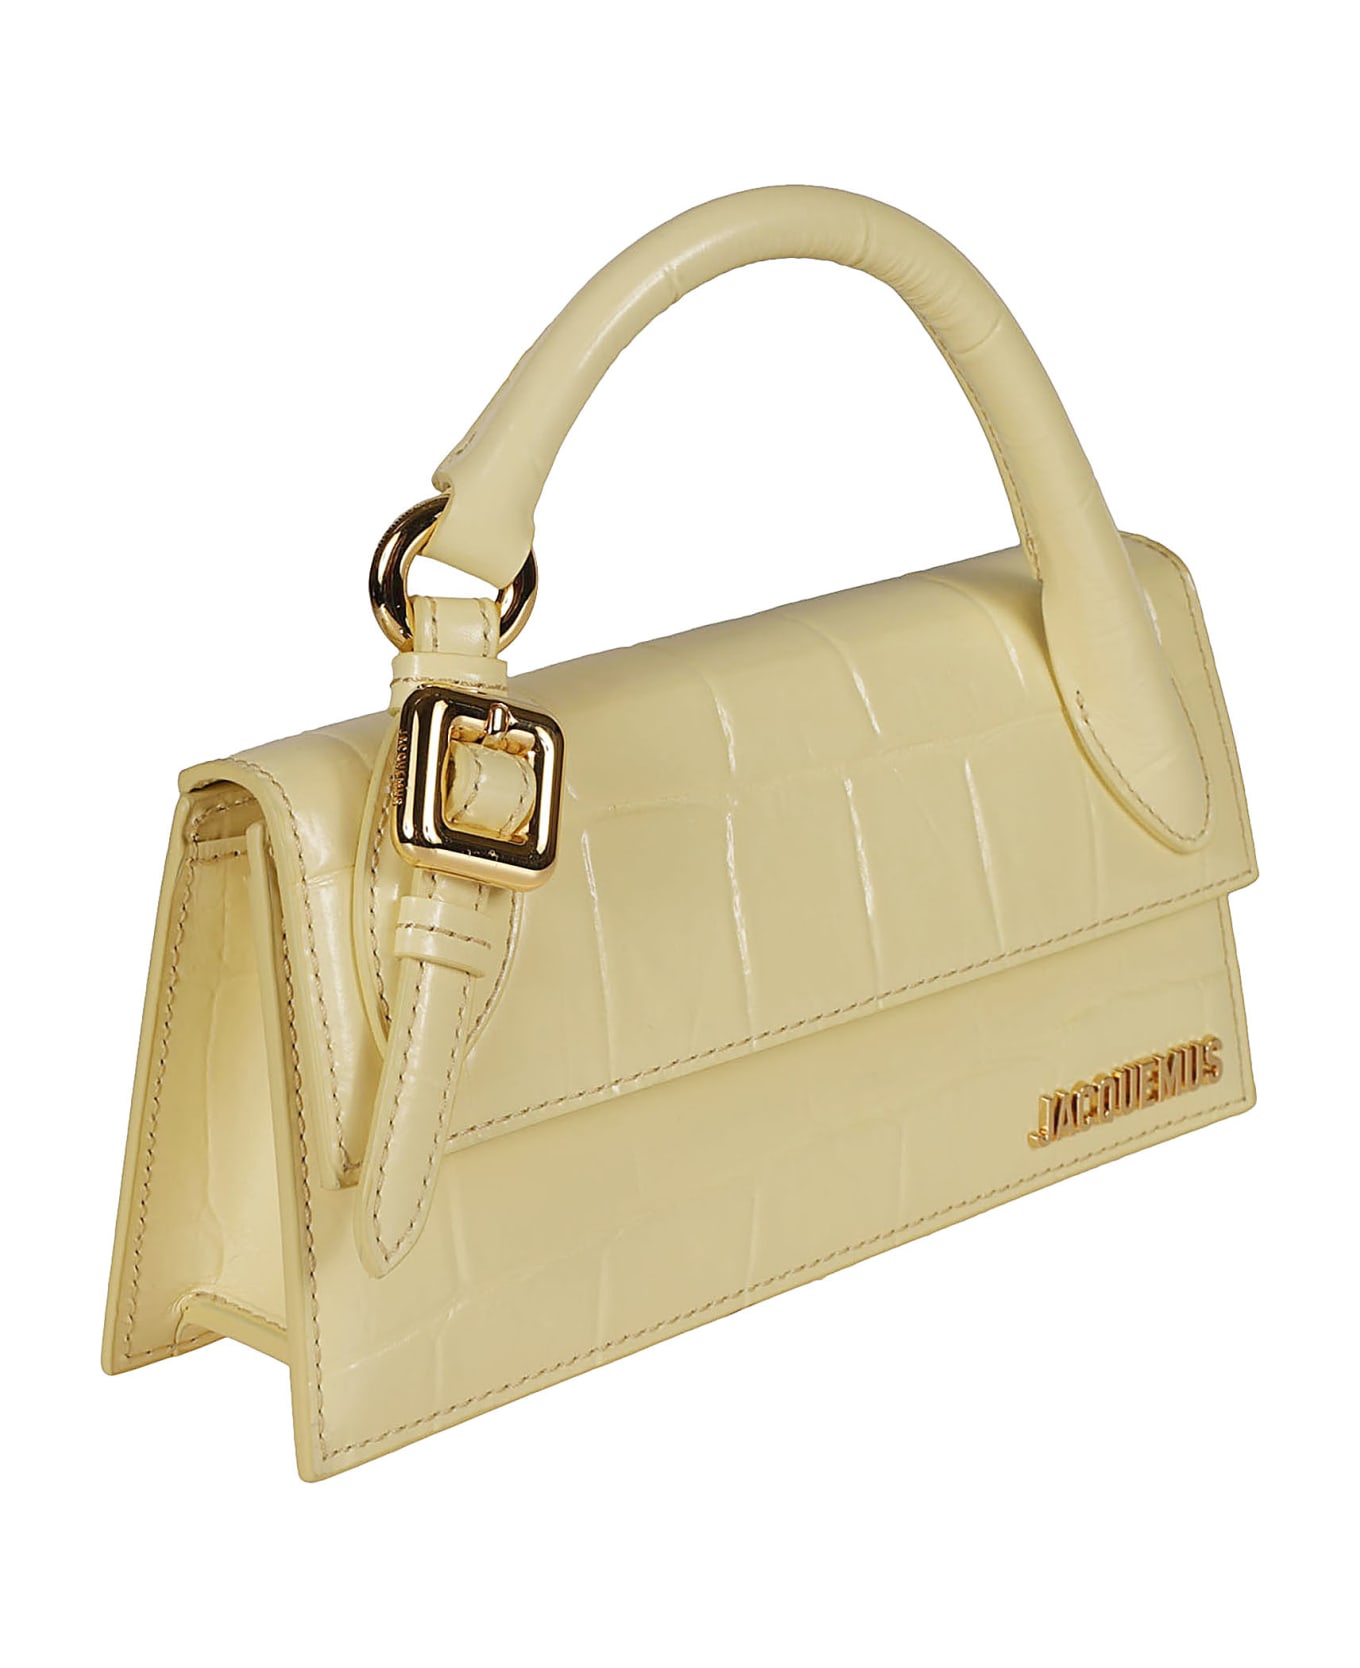 Jacquemus Le Chiquito Long Tote - Pale Yellow